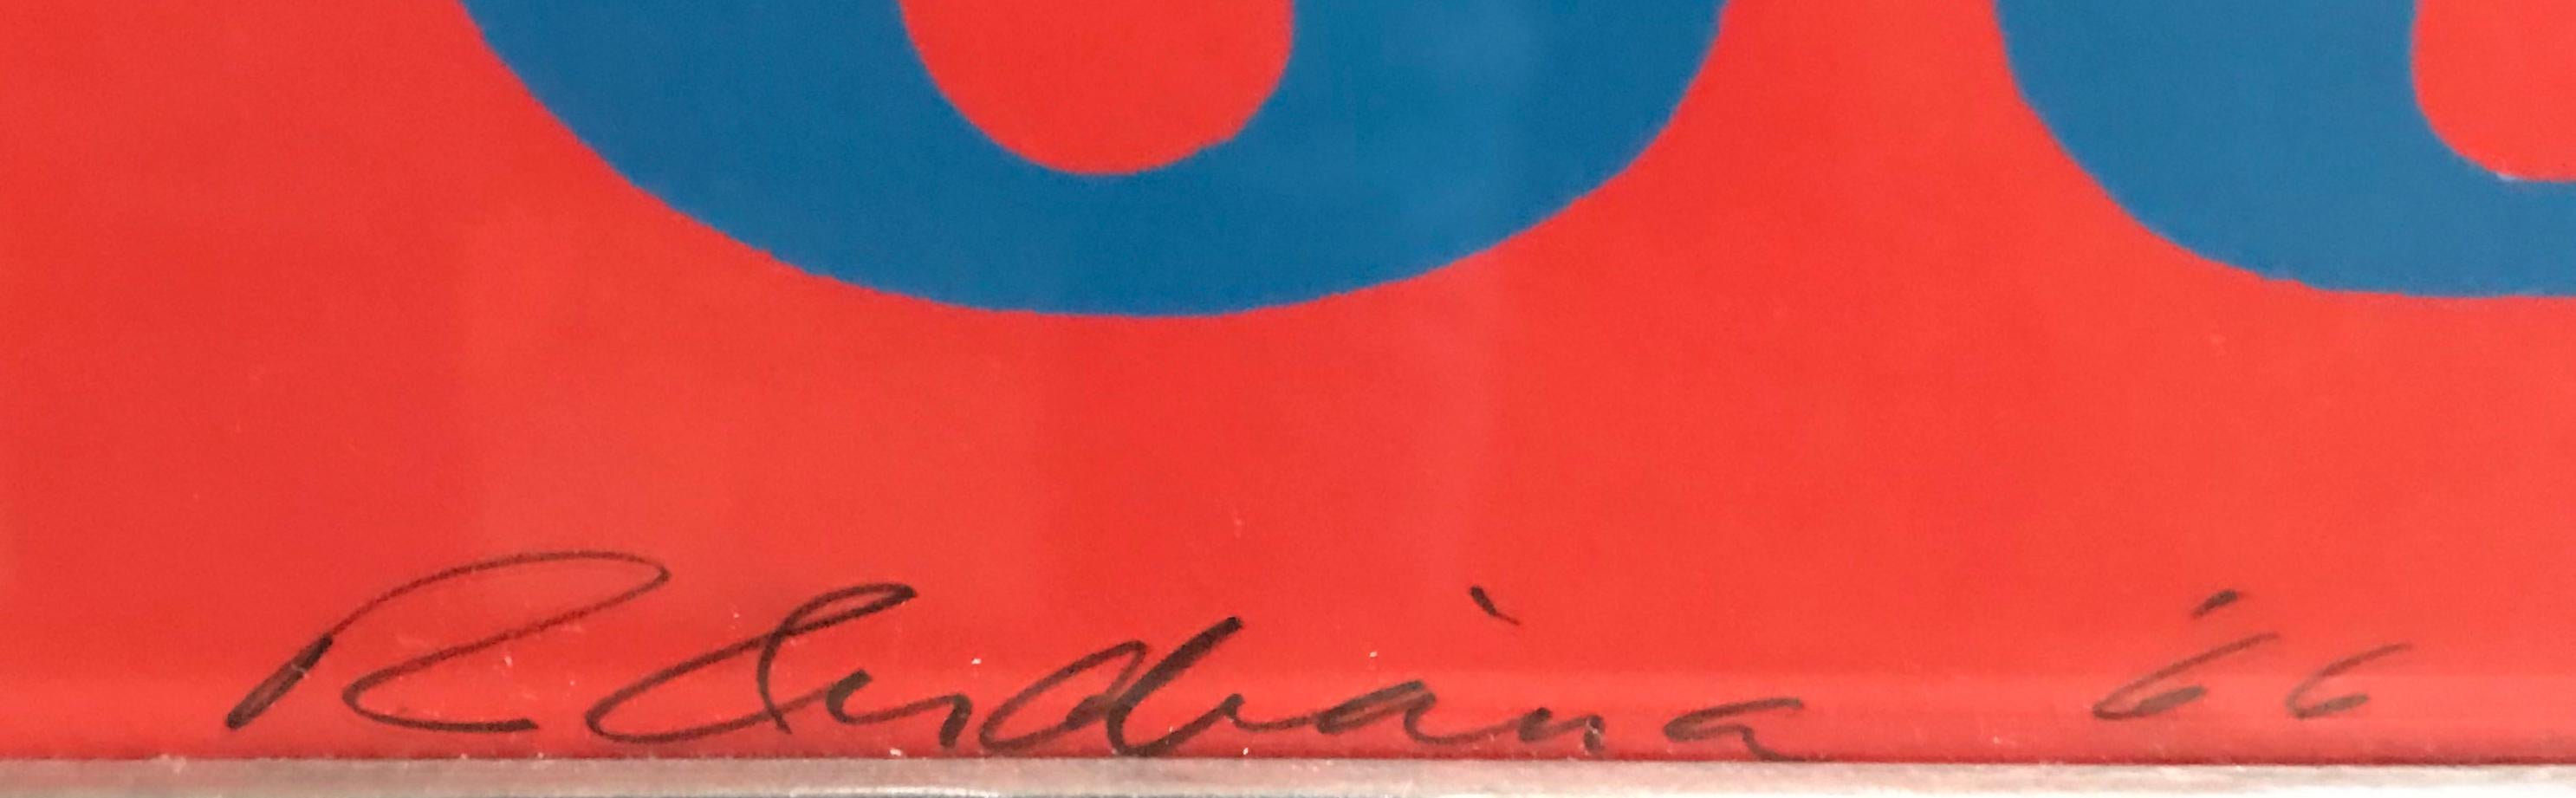 LOVE, Stable Gallery (Original Historic Poster Hand Signed by Robert Indiana) For Sale 1